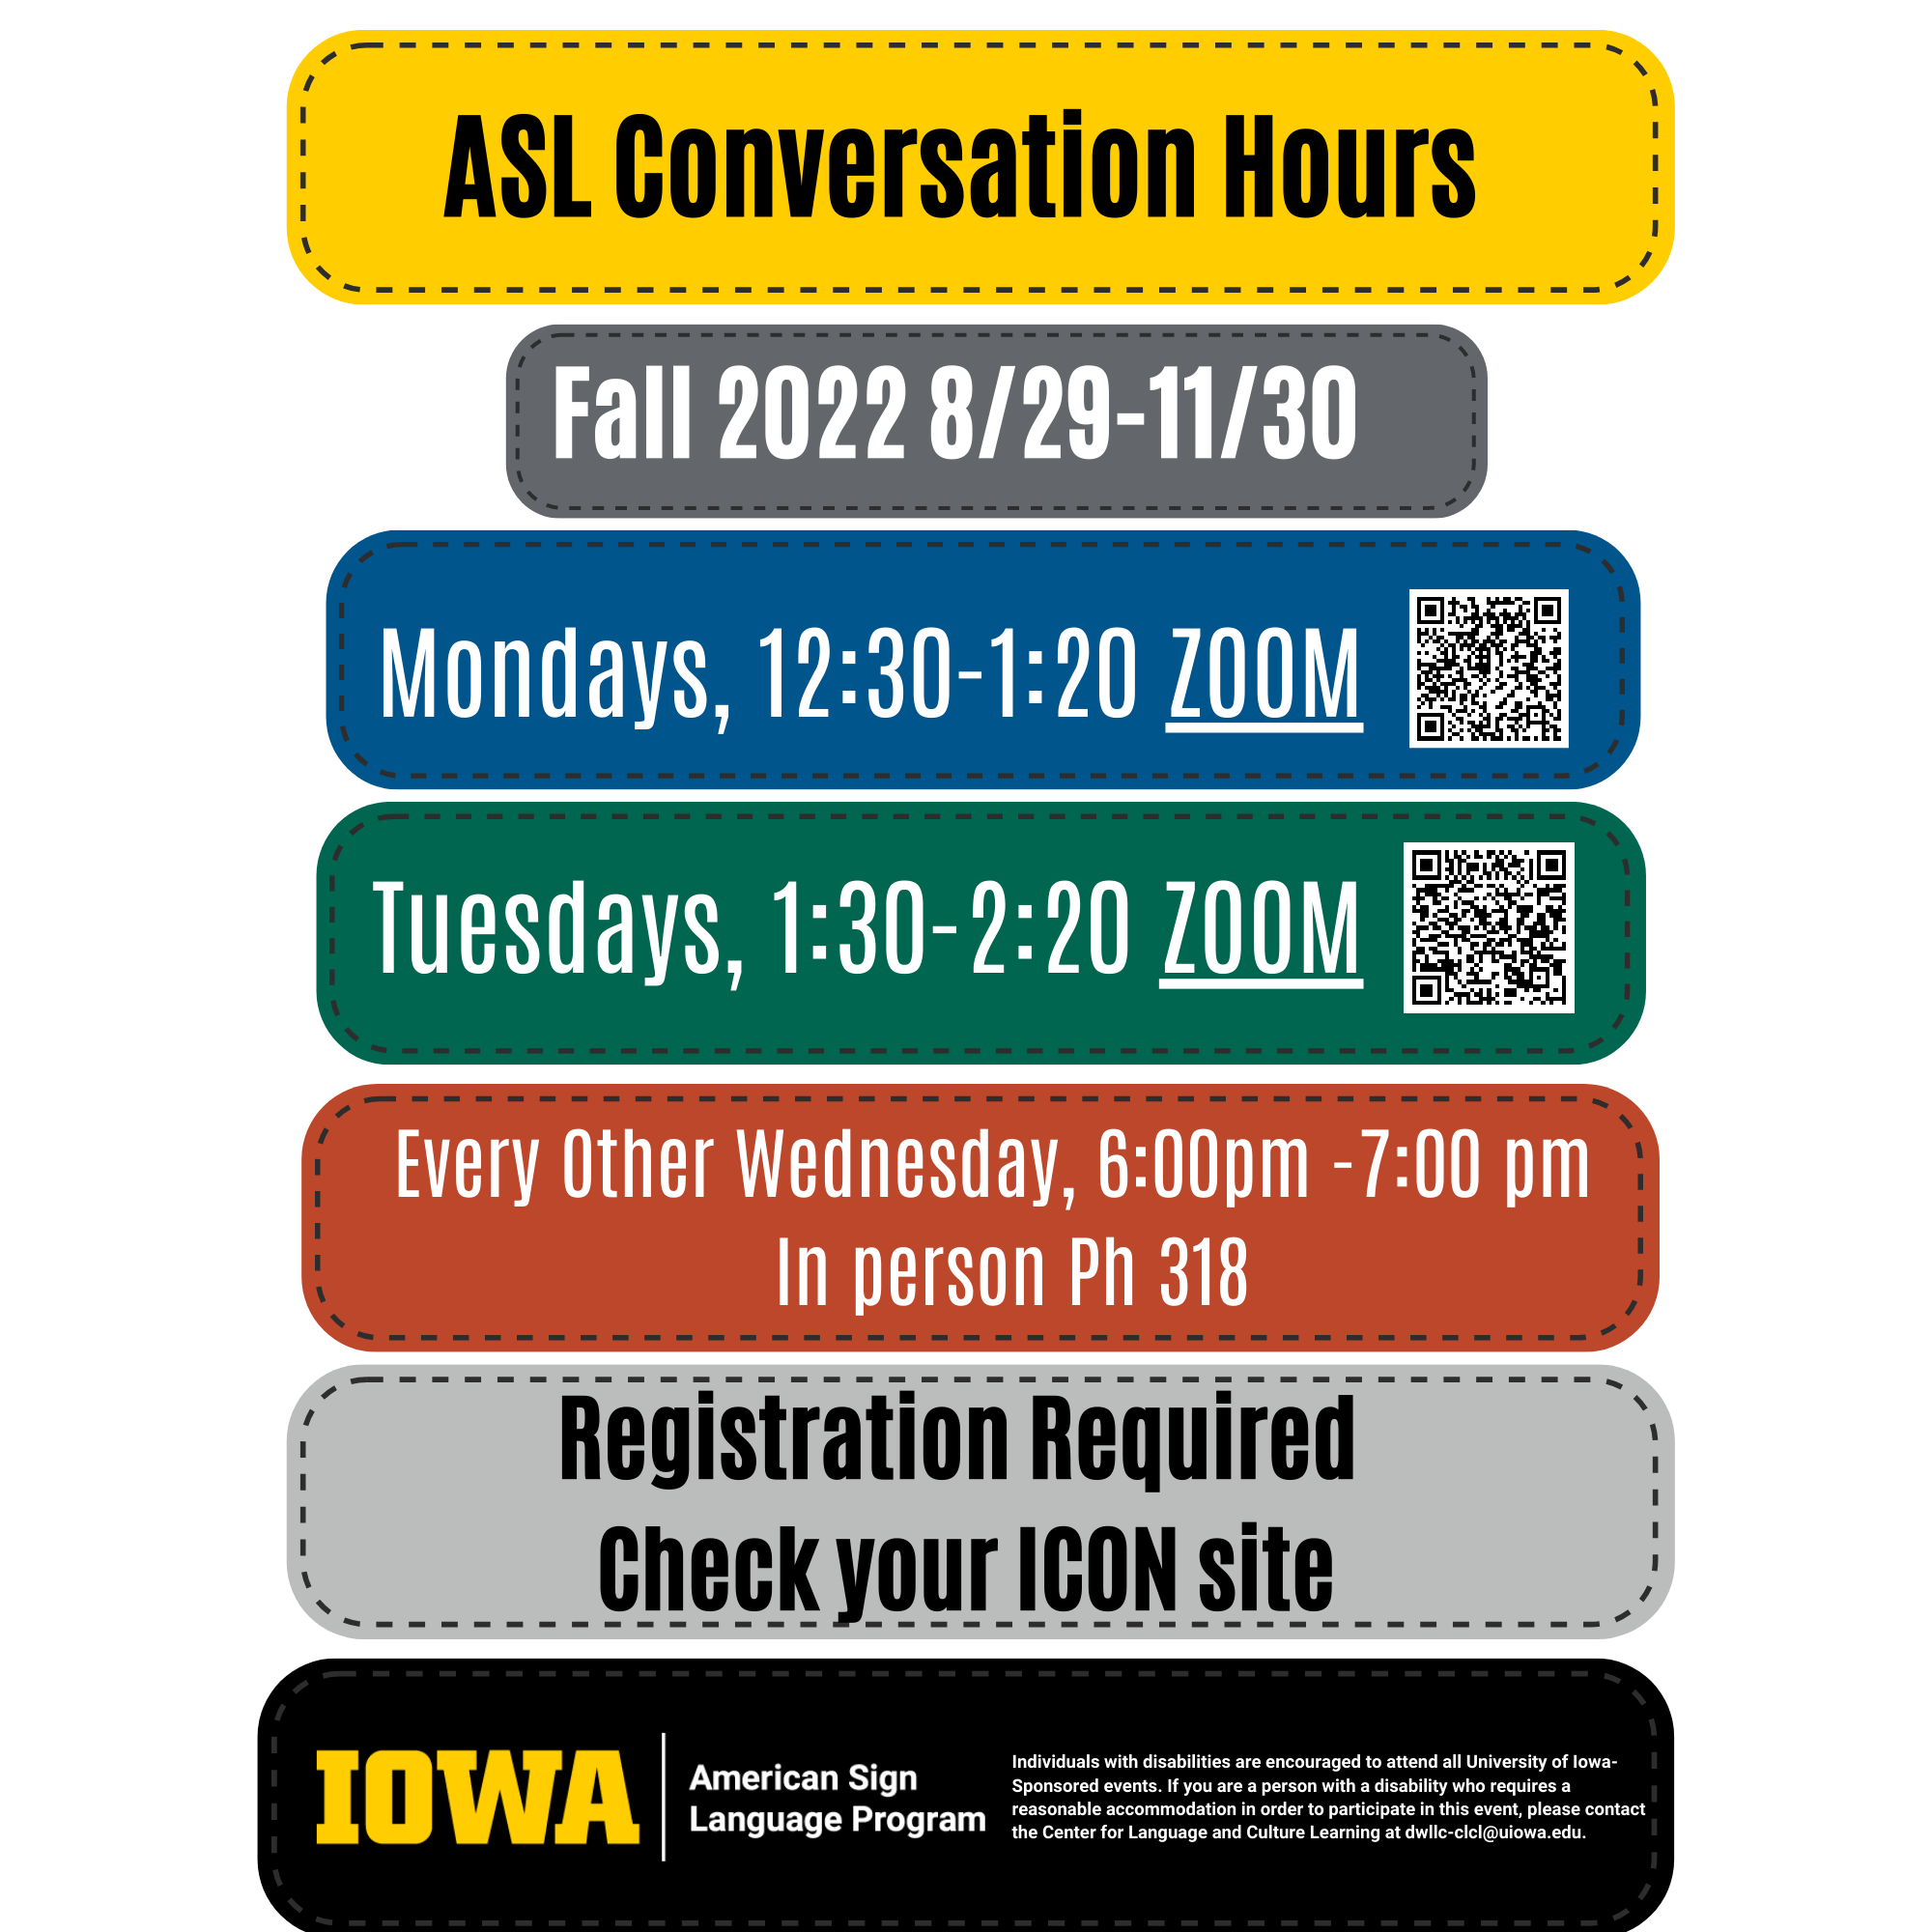 flyer for conversation hour